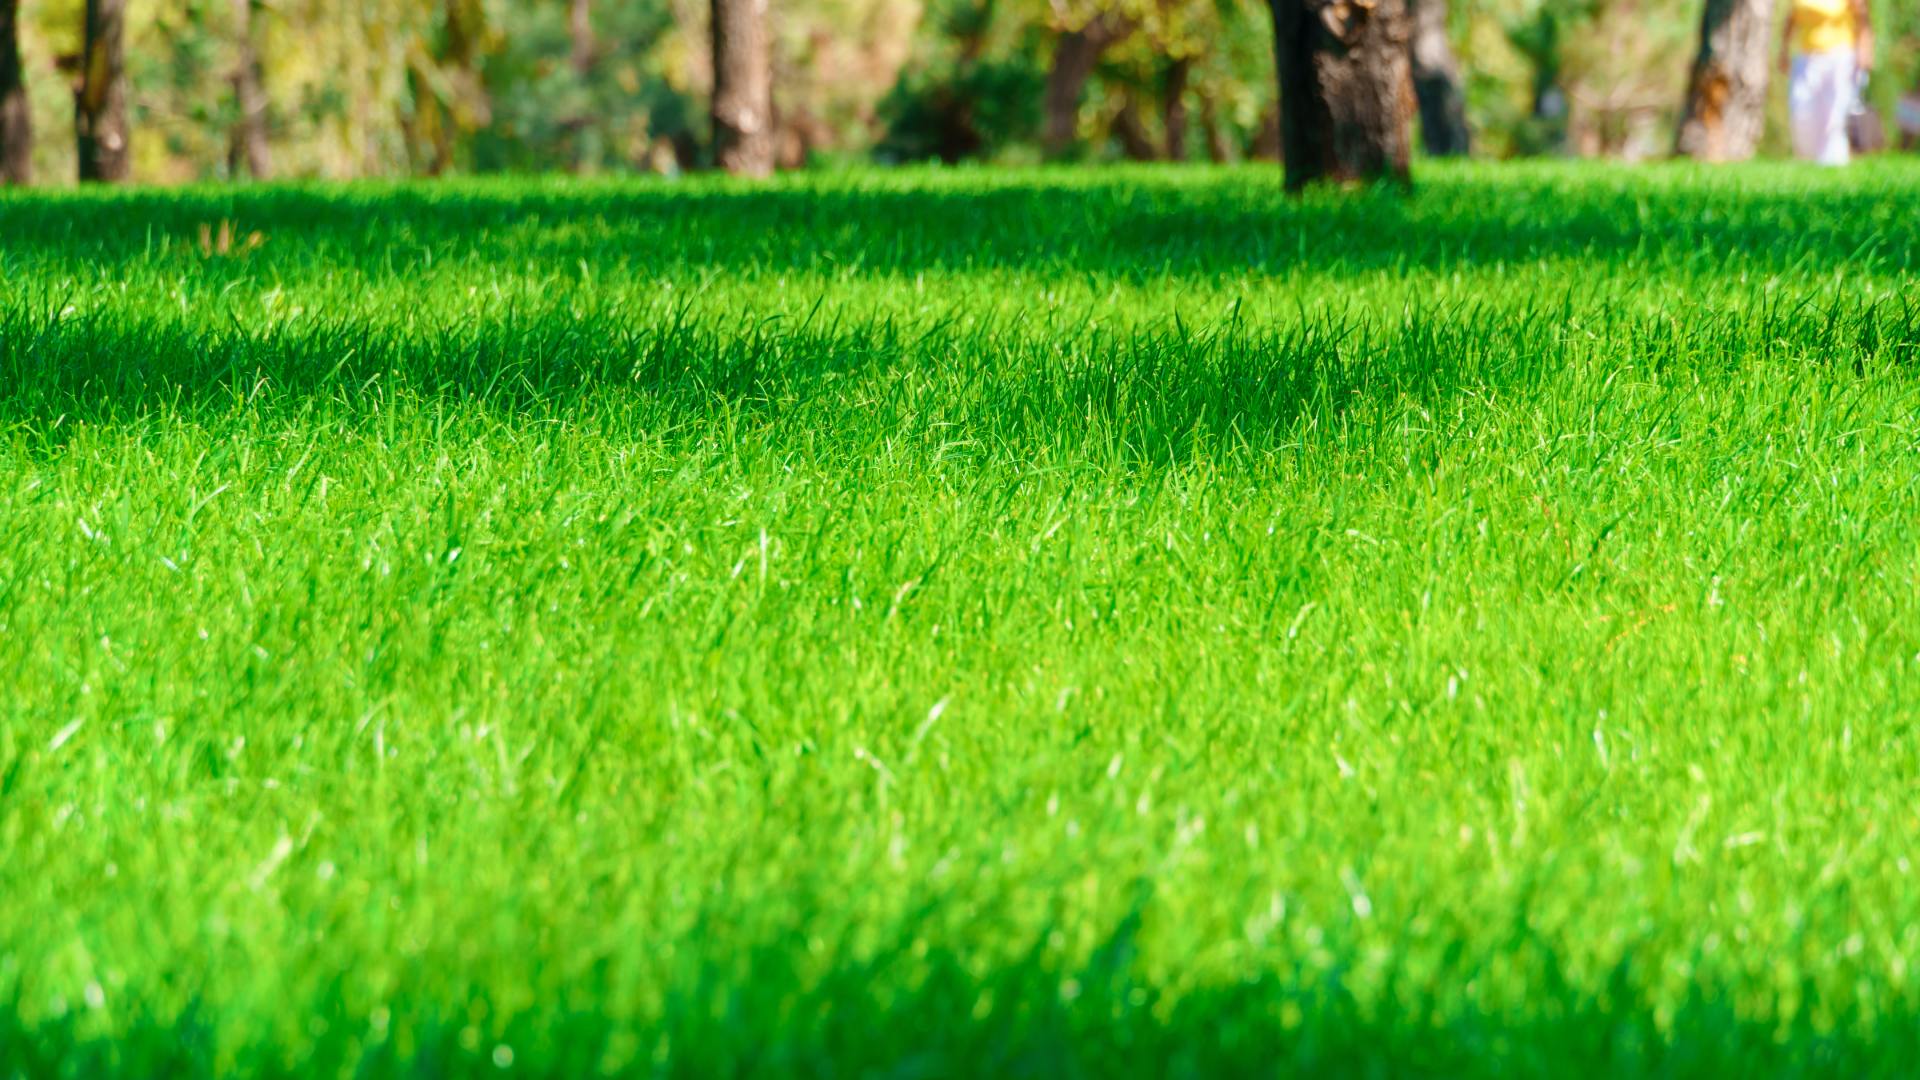 Potassium - One of the Most Important Ingredients in Lawn Fertilizer